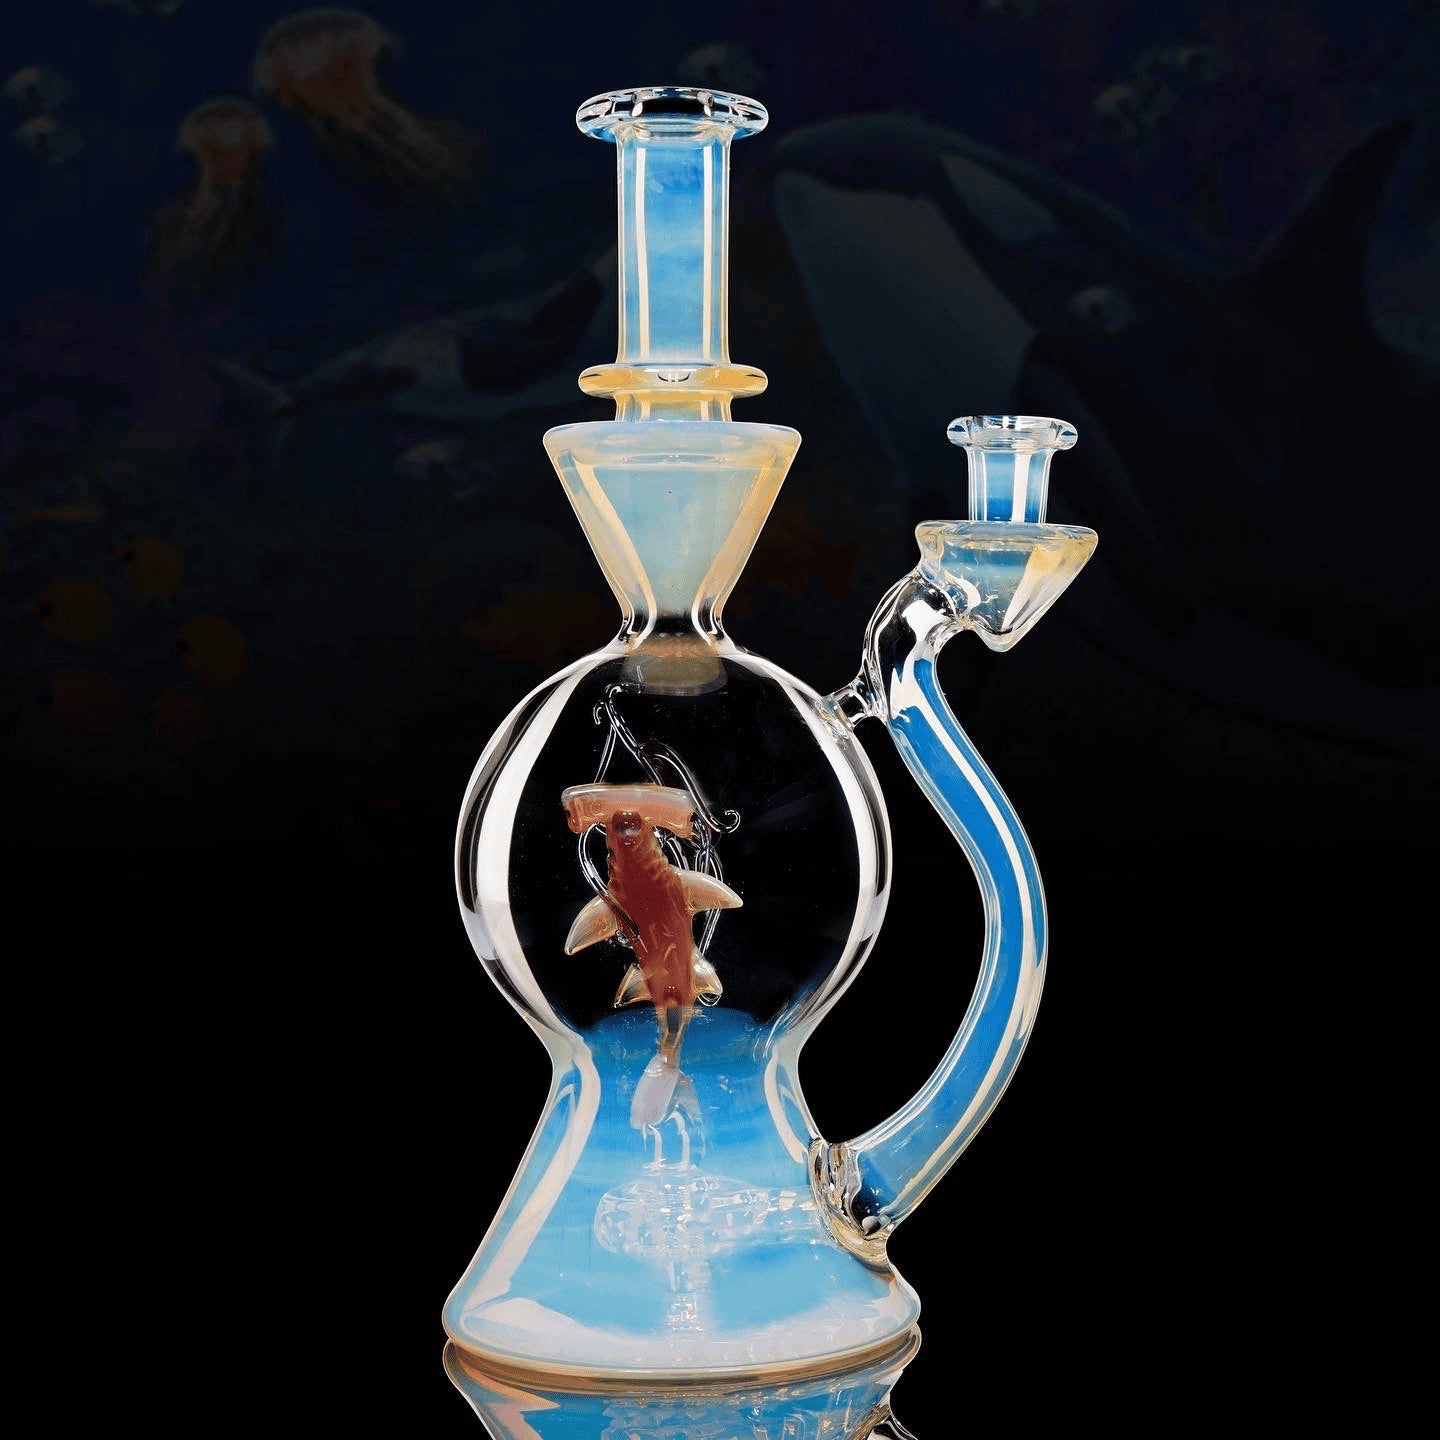 sophisticated design of the Fumed Aquarium by Liz Wright Glass (GV 2022)